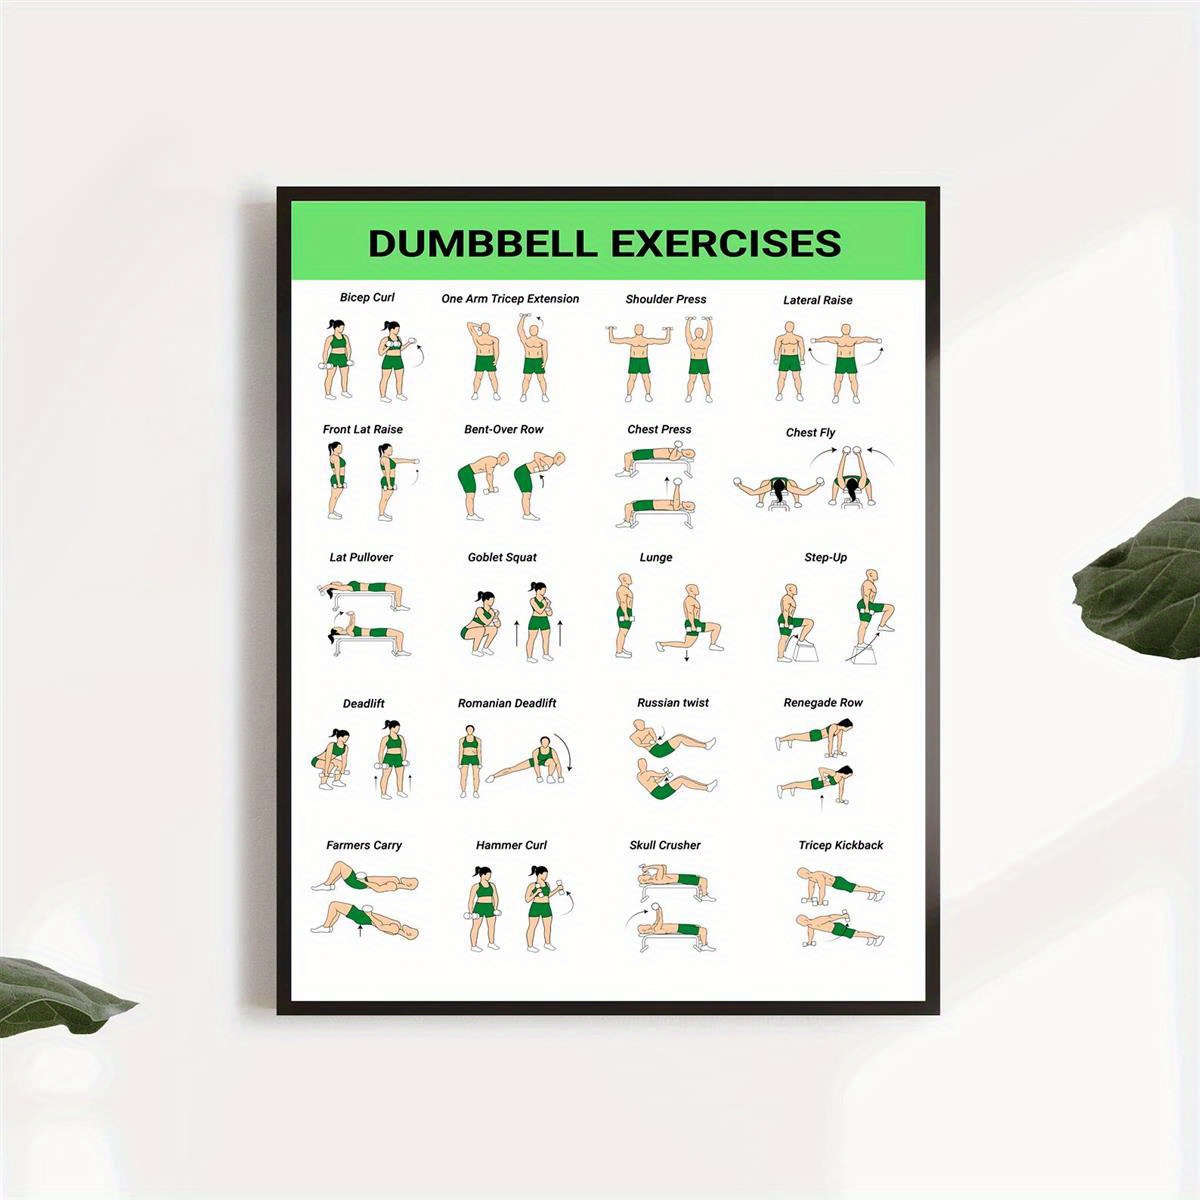 dumbbell exercise chart canvas poster waterproof art print for home gym office living room bedroom cafe bar decor art deco modern style frameless wall hanging decor indoor outdoor use